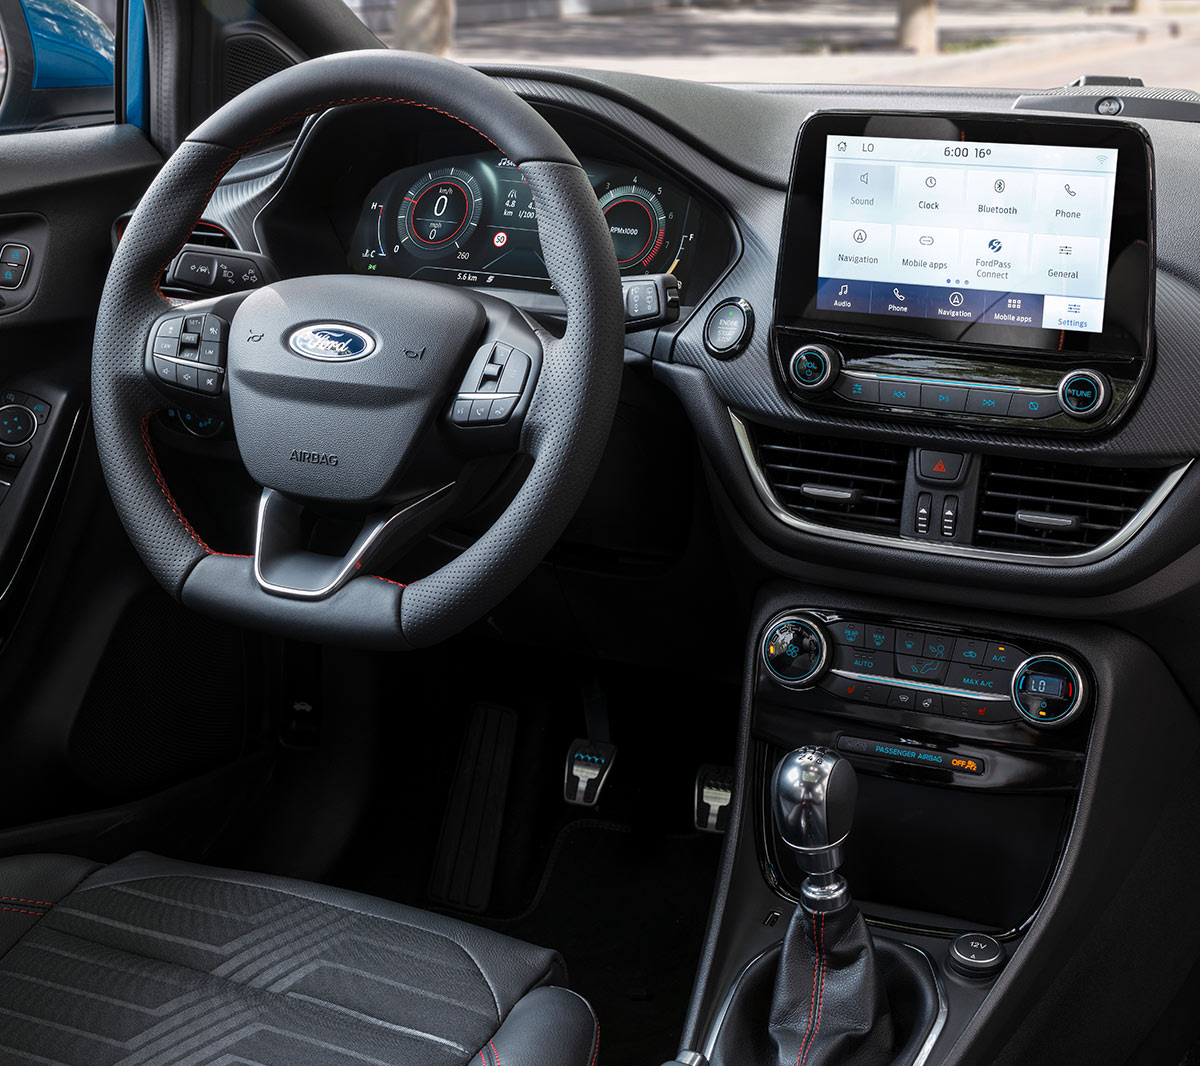 Ford Puma interior with steering wheel and SYNC 3